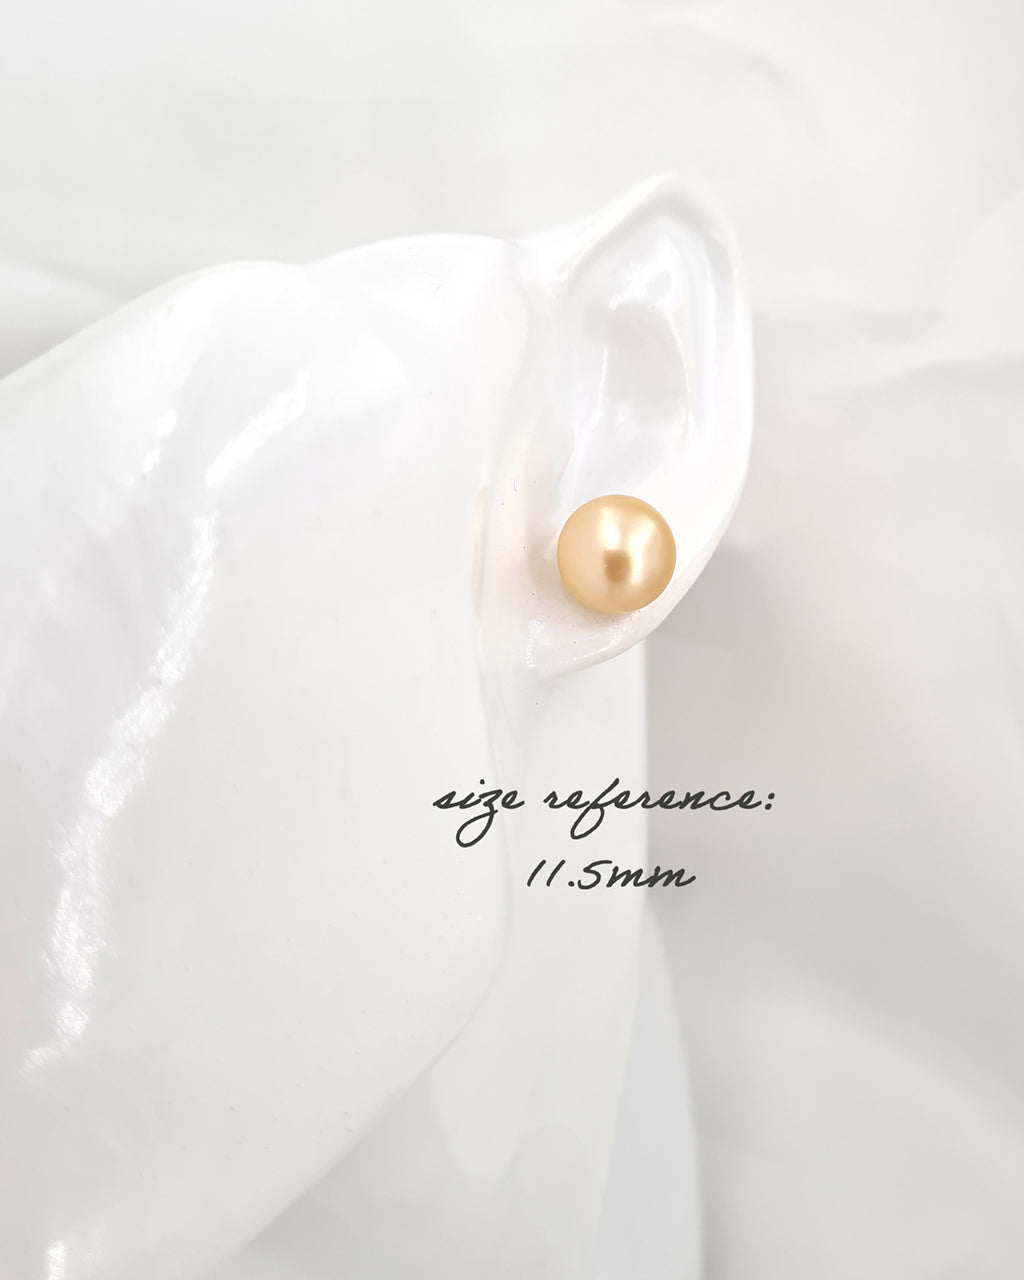 10mm South Sea Round Pearl Stud Earrings- Choose Your Quality